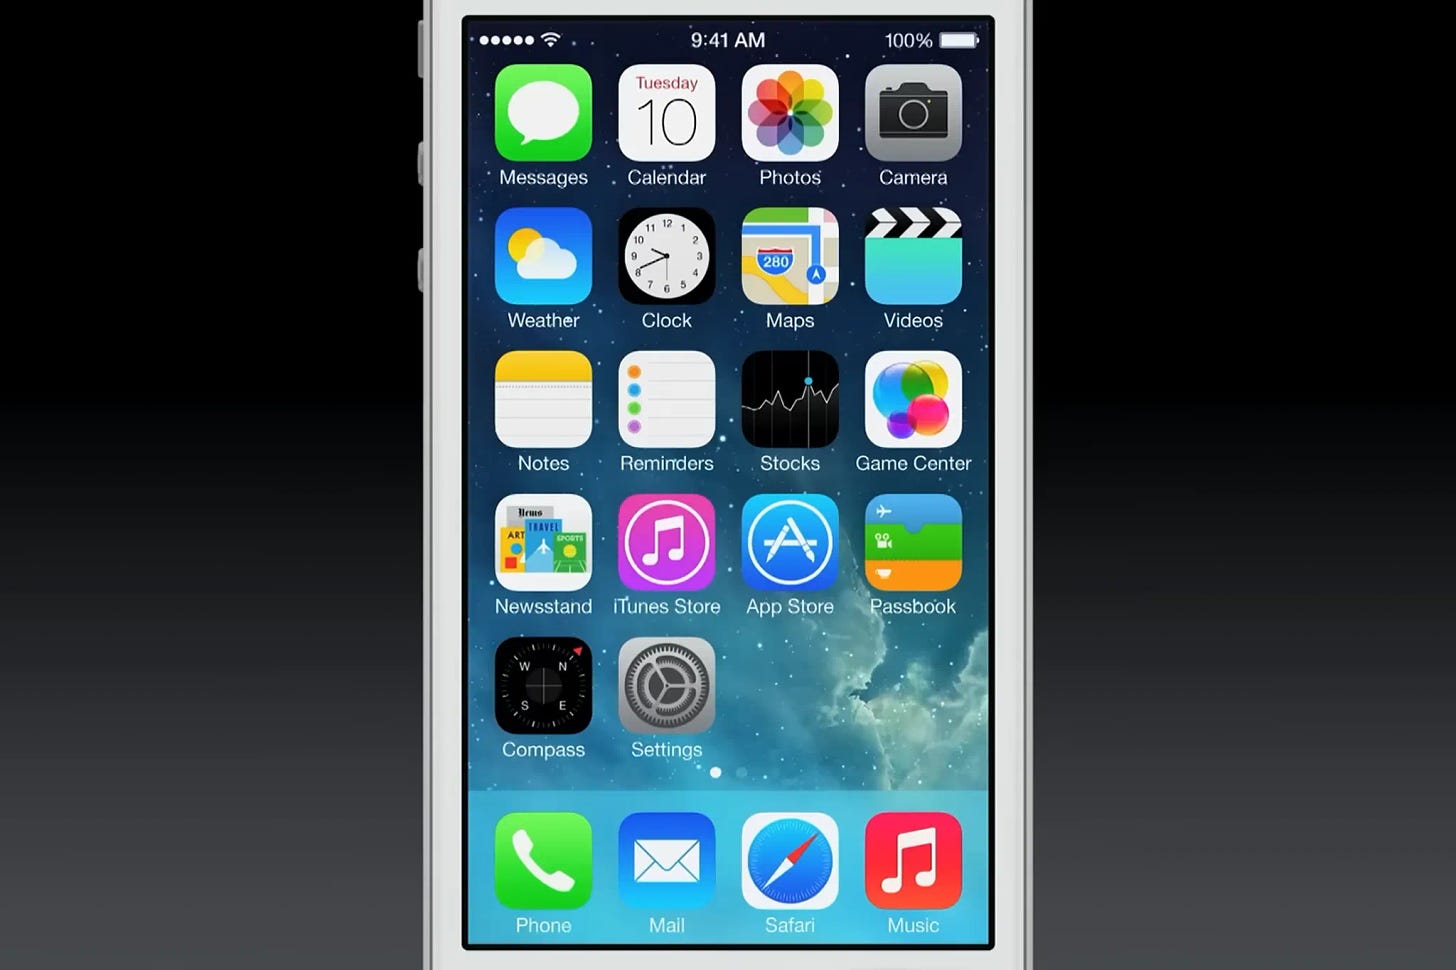 Promotional image of a white iPhone showing the then new release of its homescreen running iOS7 in 2013